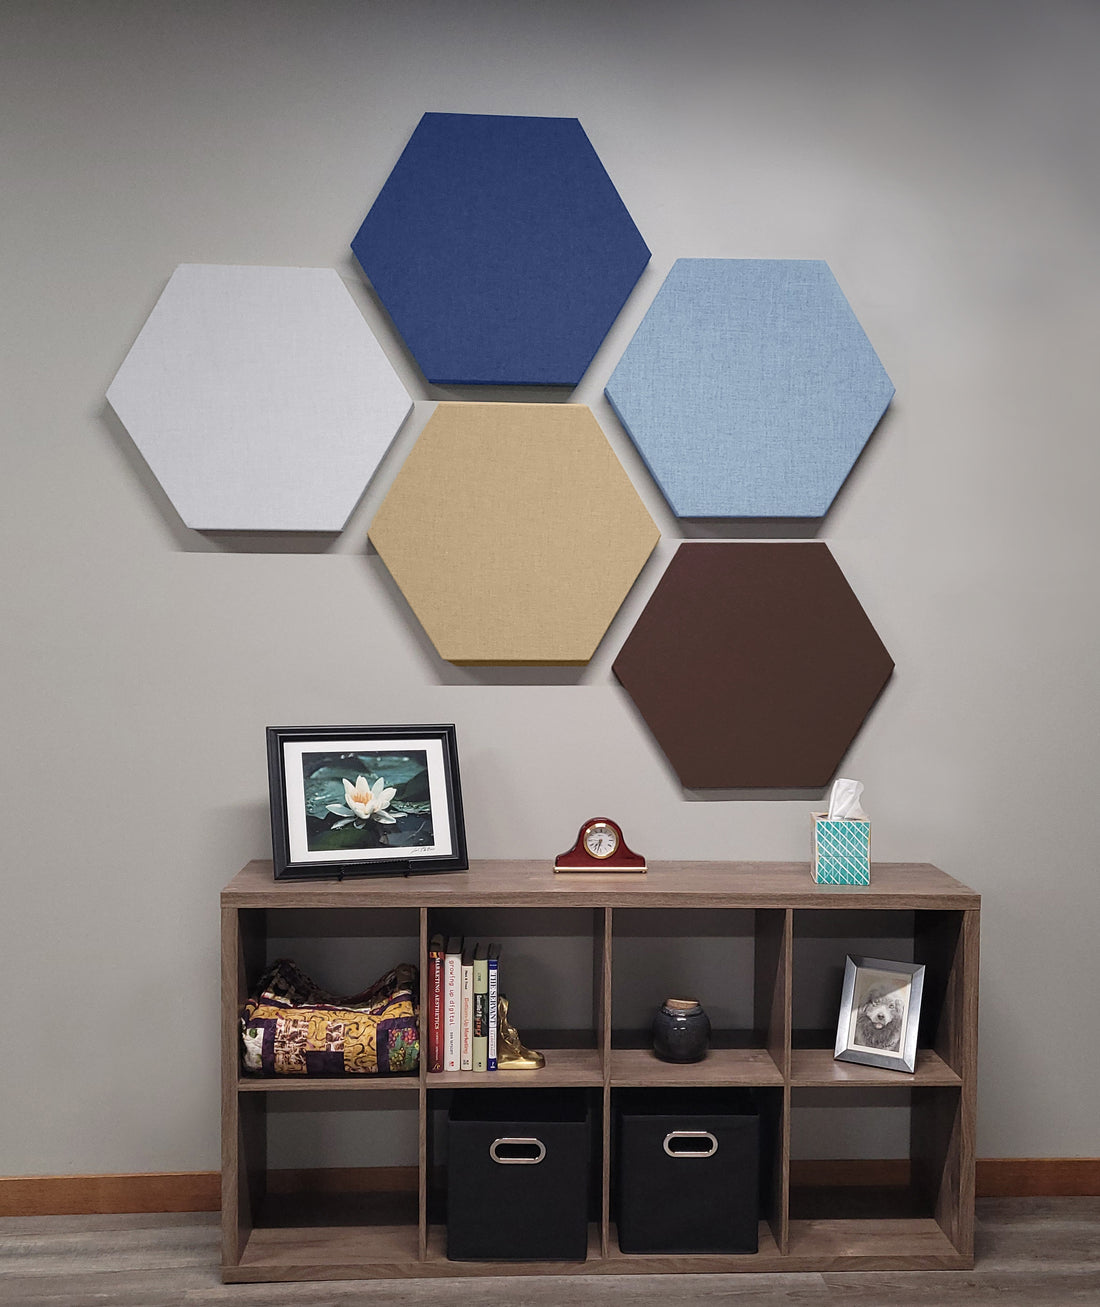 Coffee in the Morning Hexagon Acoustic Panel Kit